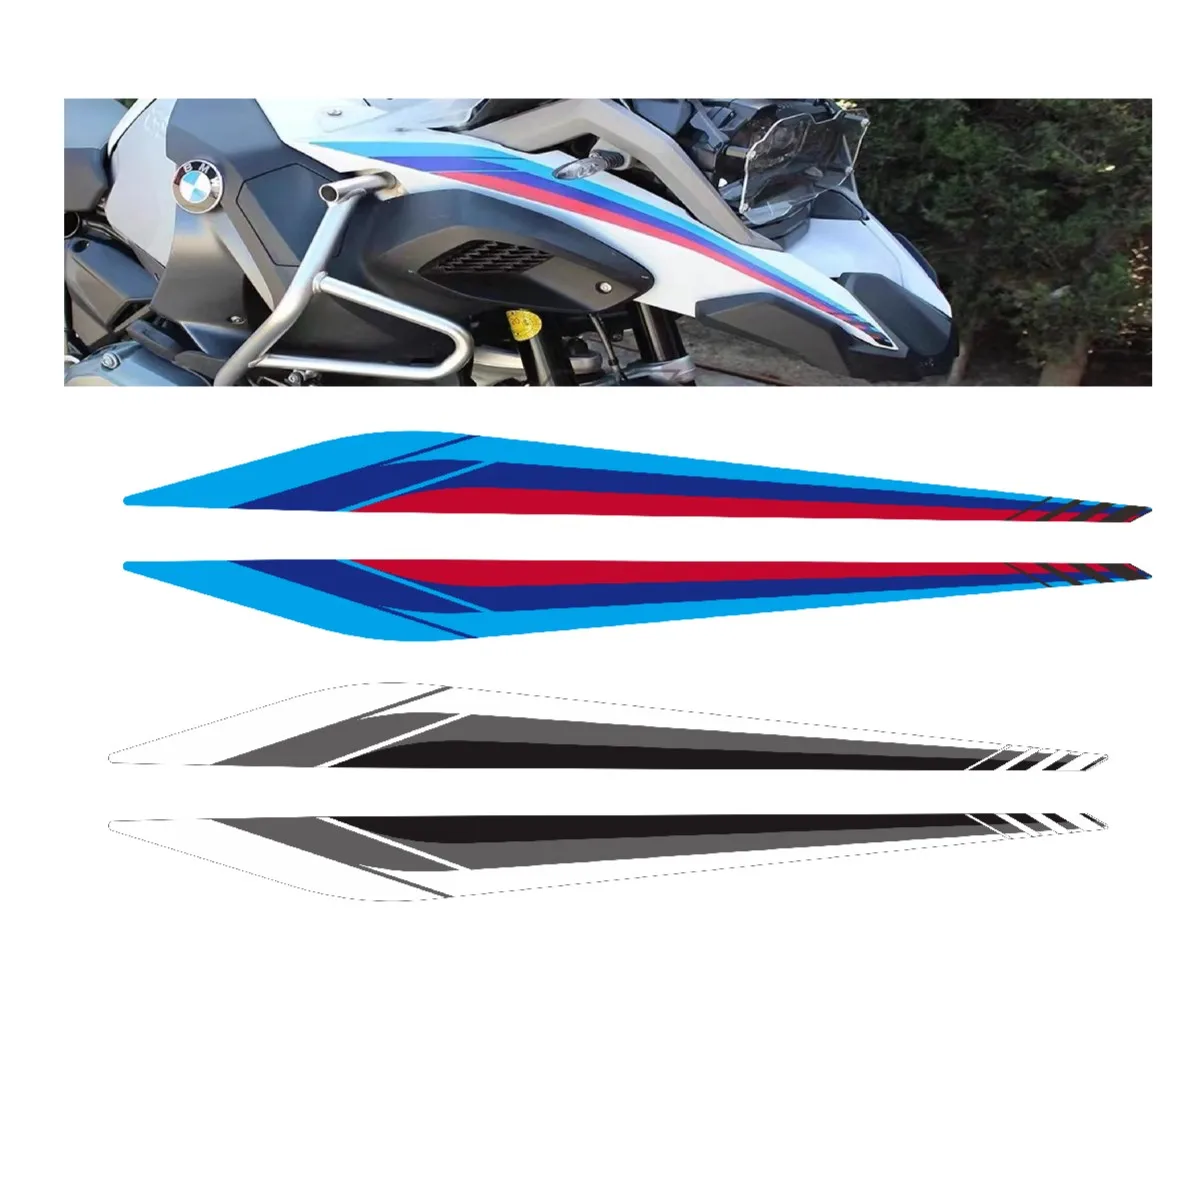 Motorcycle Decoration Decals Kit Case for BMW R1200GS Adventure LC 2014-2018 R1250GS Adv 2019-2020